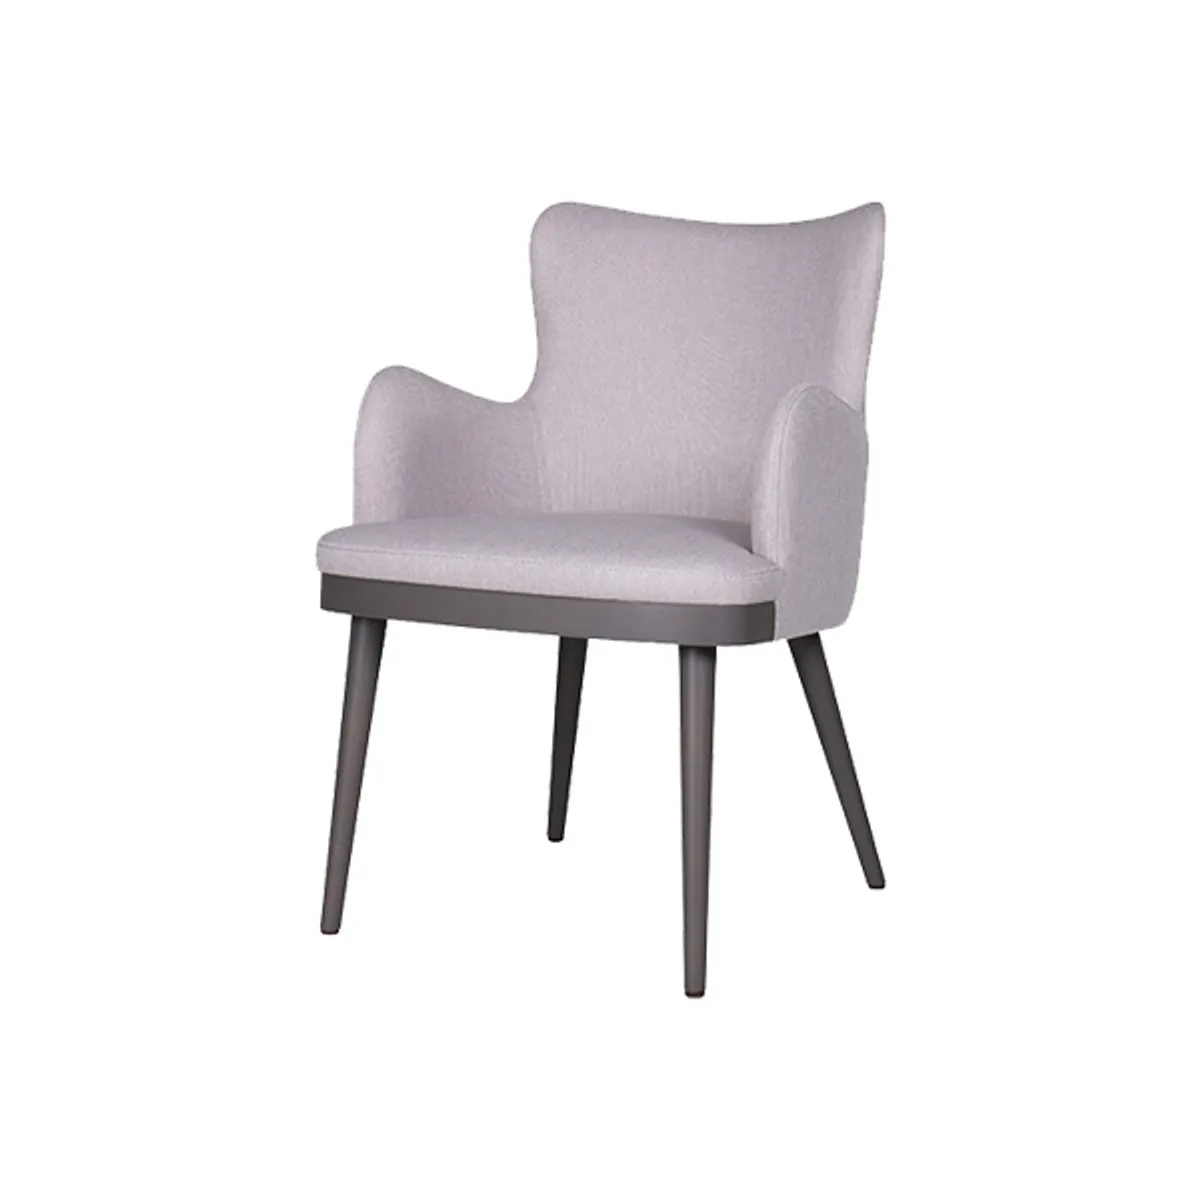 Kelly Flow Armchair Inside Out Contracts2